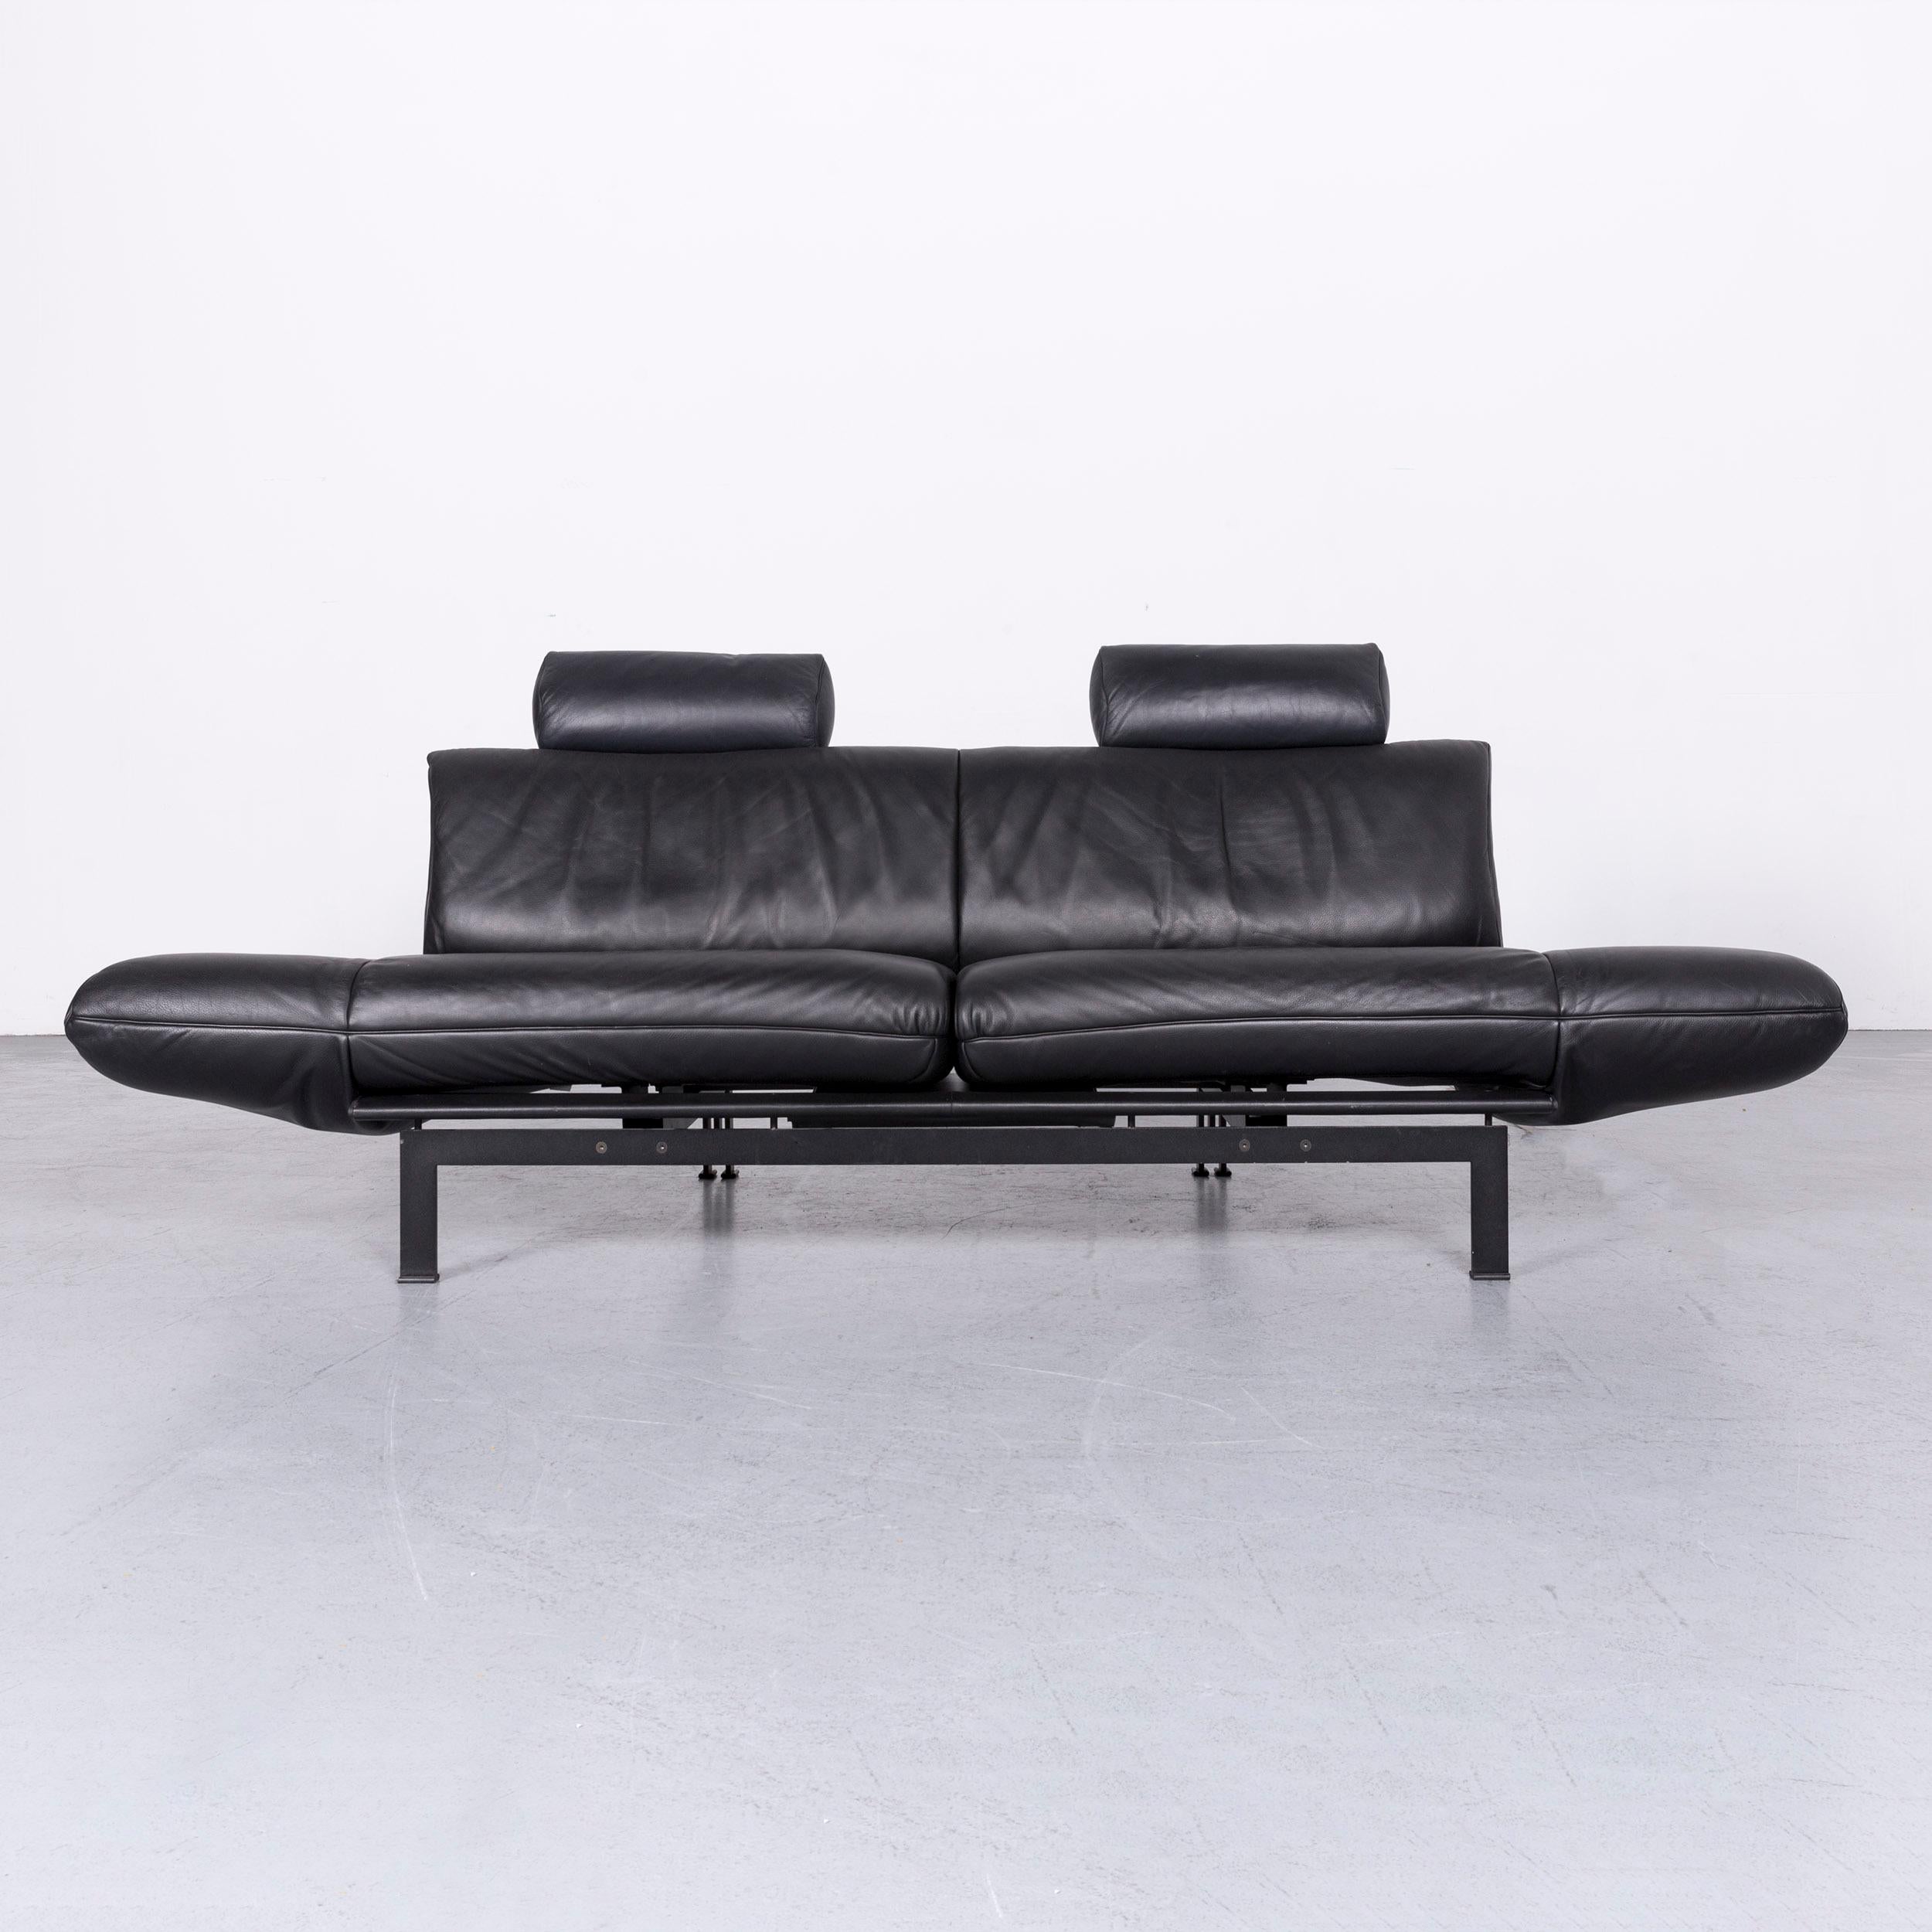 We bring to you a De Sede DS 140 designer leather sofa black three-seat function modern.